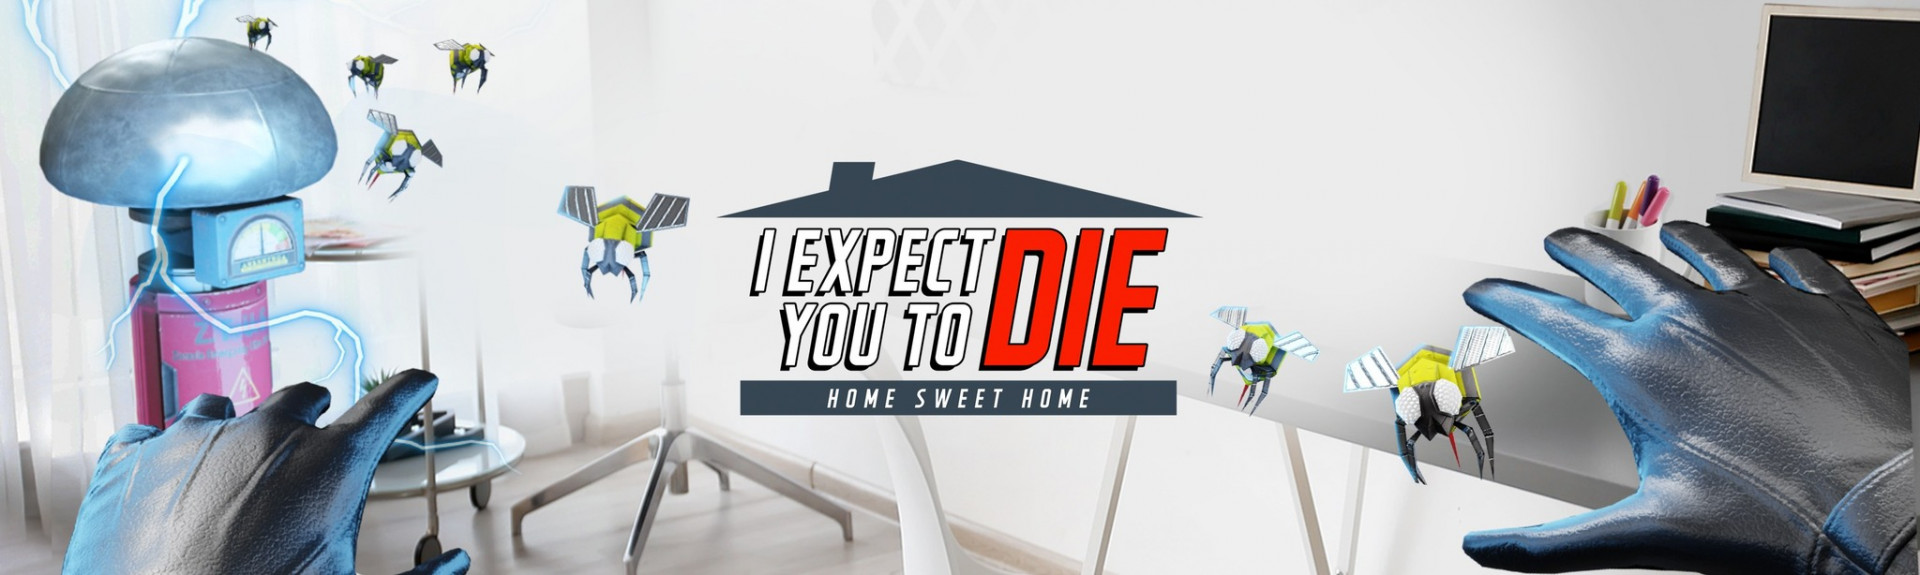 I Expect You To Die: Home Sweet Home